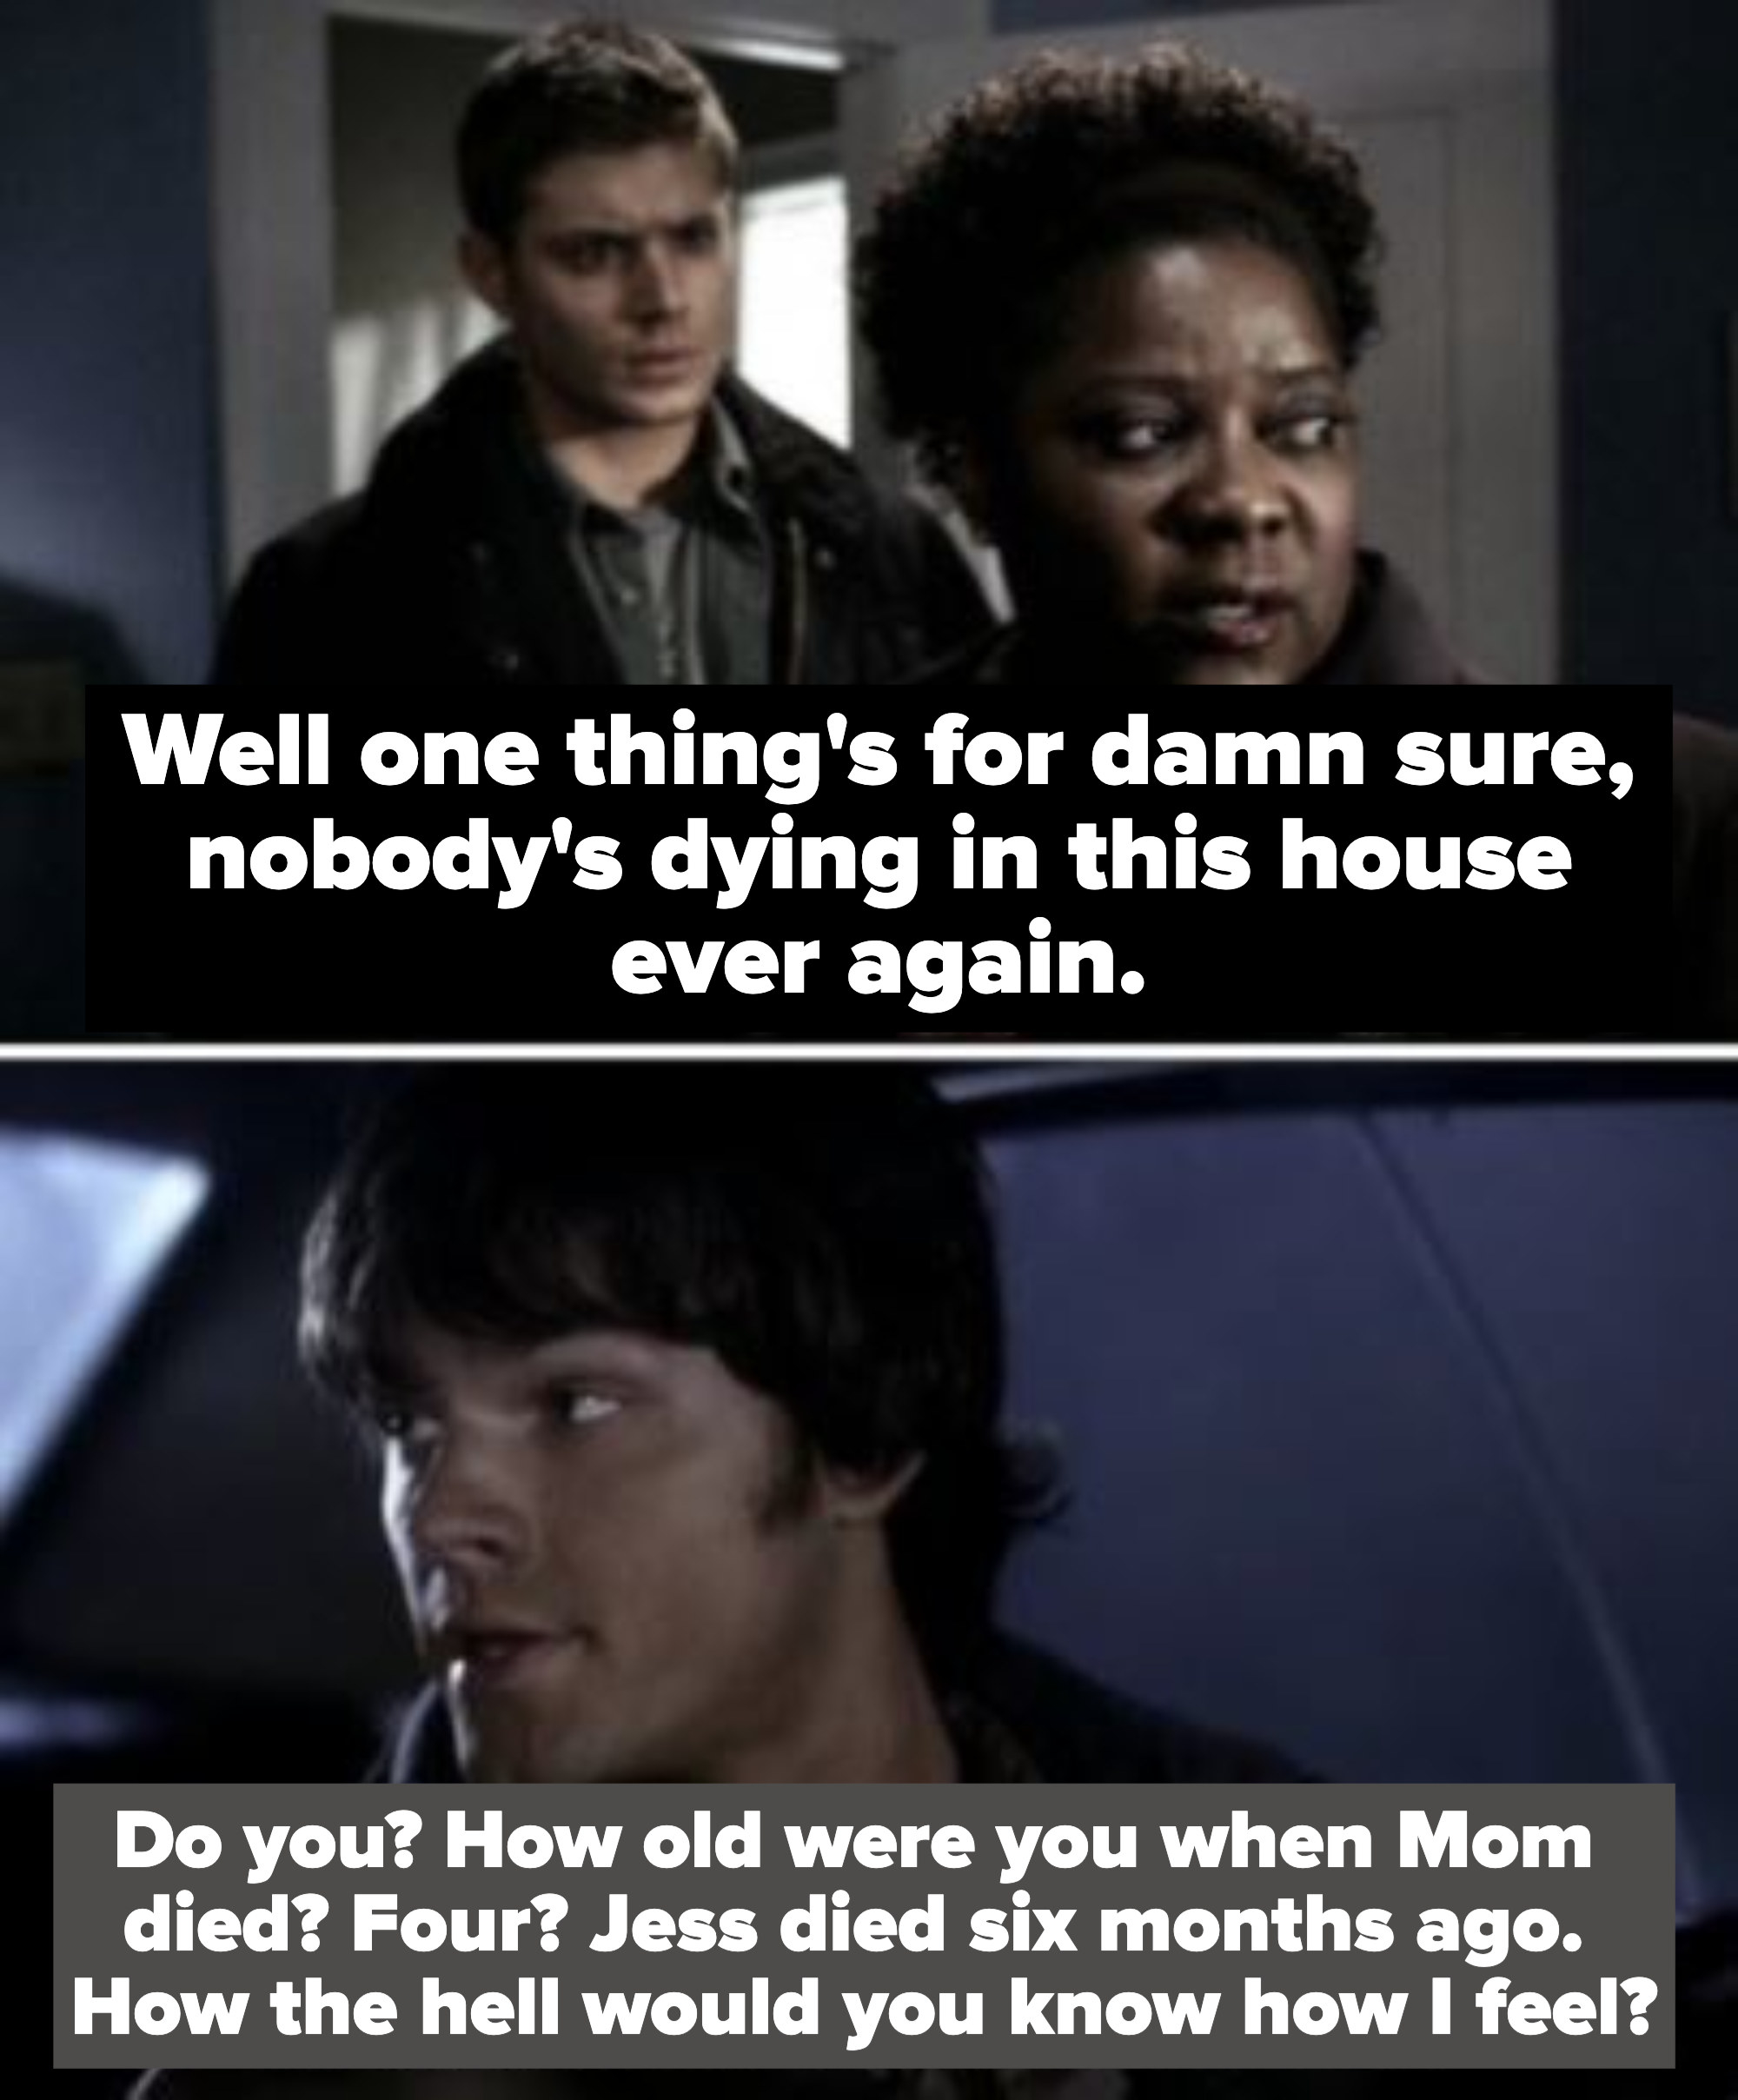 woman tells dean, &quot;well one things for damn sure nobody&#x27;s dying in this house ever again&quot; and next image is sam talking to dean saying &quot;how old were you when mom died? four? jess died six months ago. how the hell would you know how i feel?&quot;